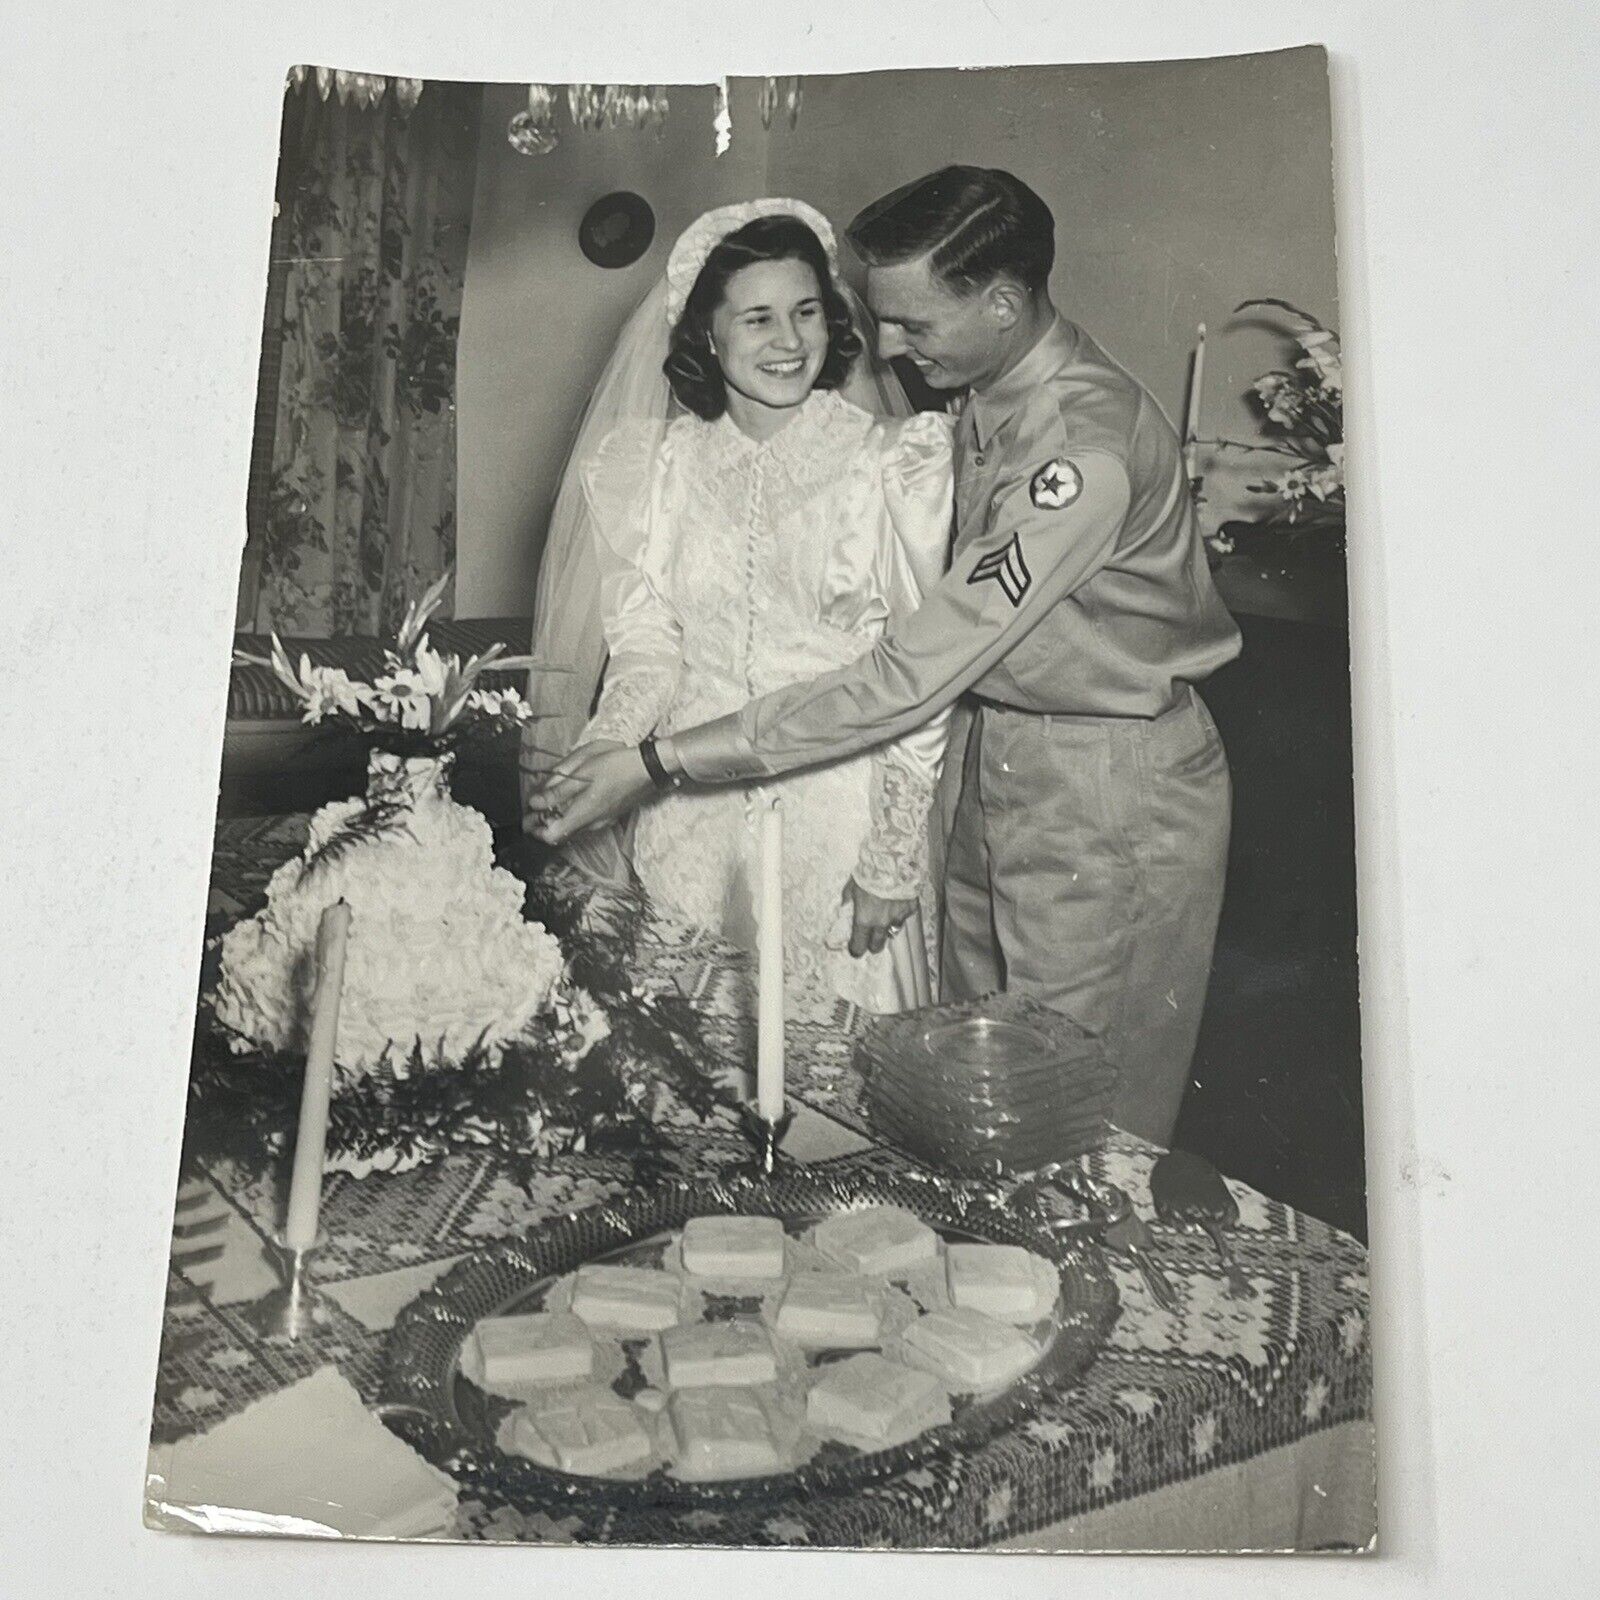 WW2 WWII Wedding Photo Corporal United States Army Service Forces Cake Cutting